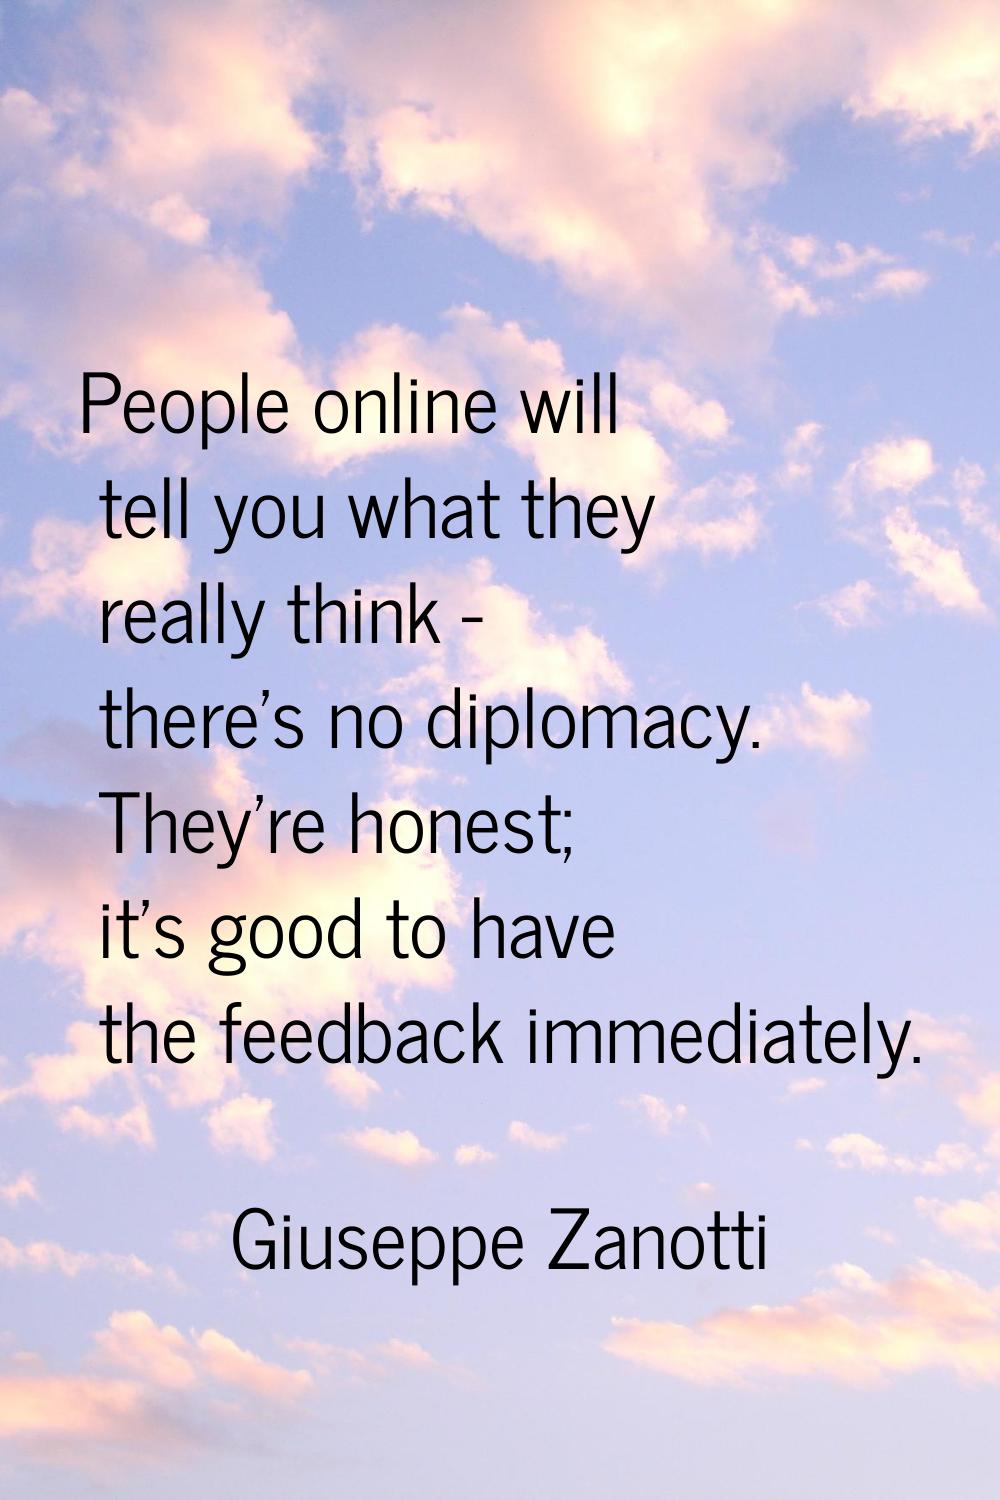 People online will tell you what they really think - there's no diplomacy. They're honest; it's goo